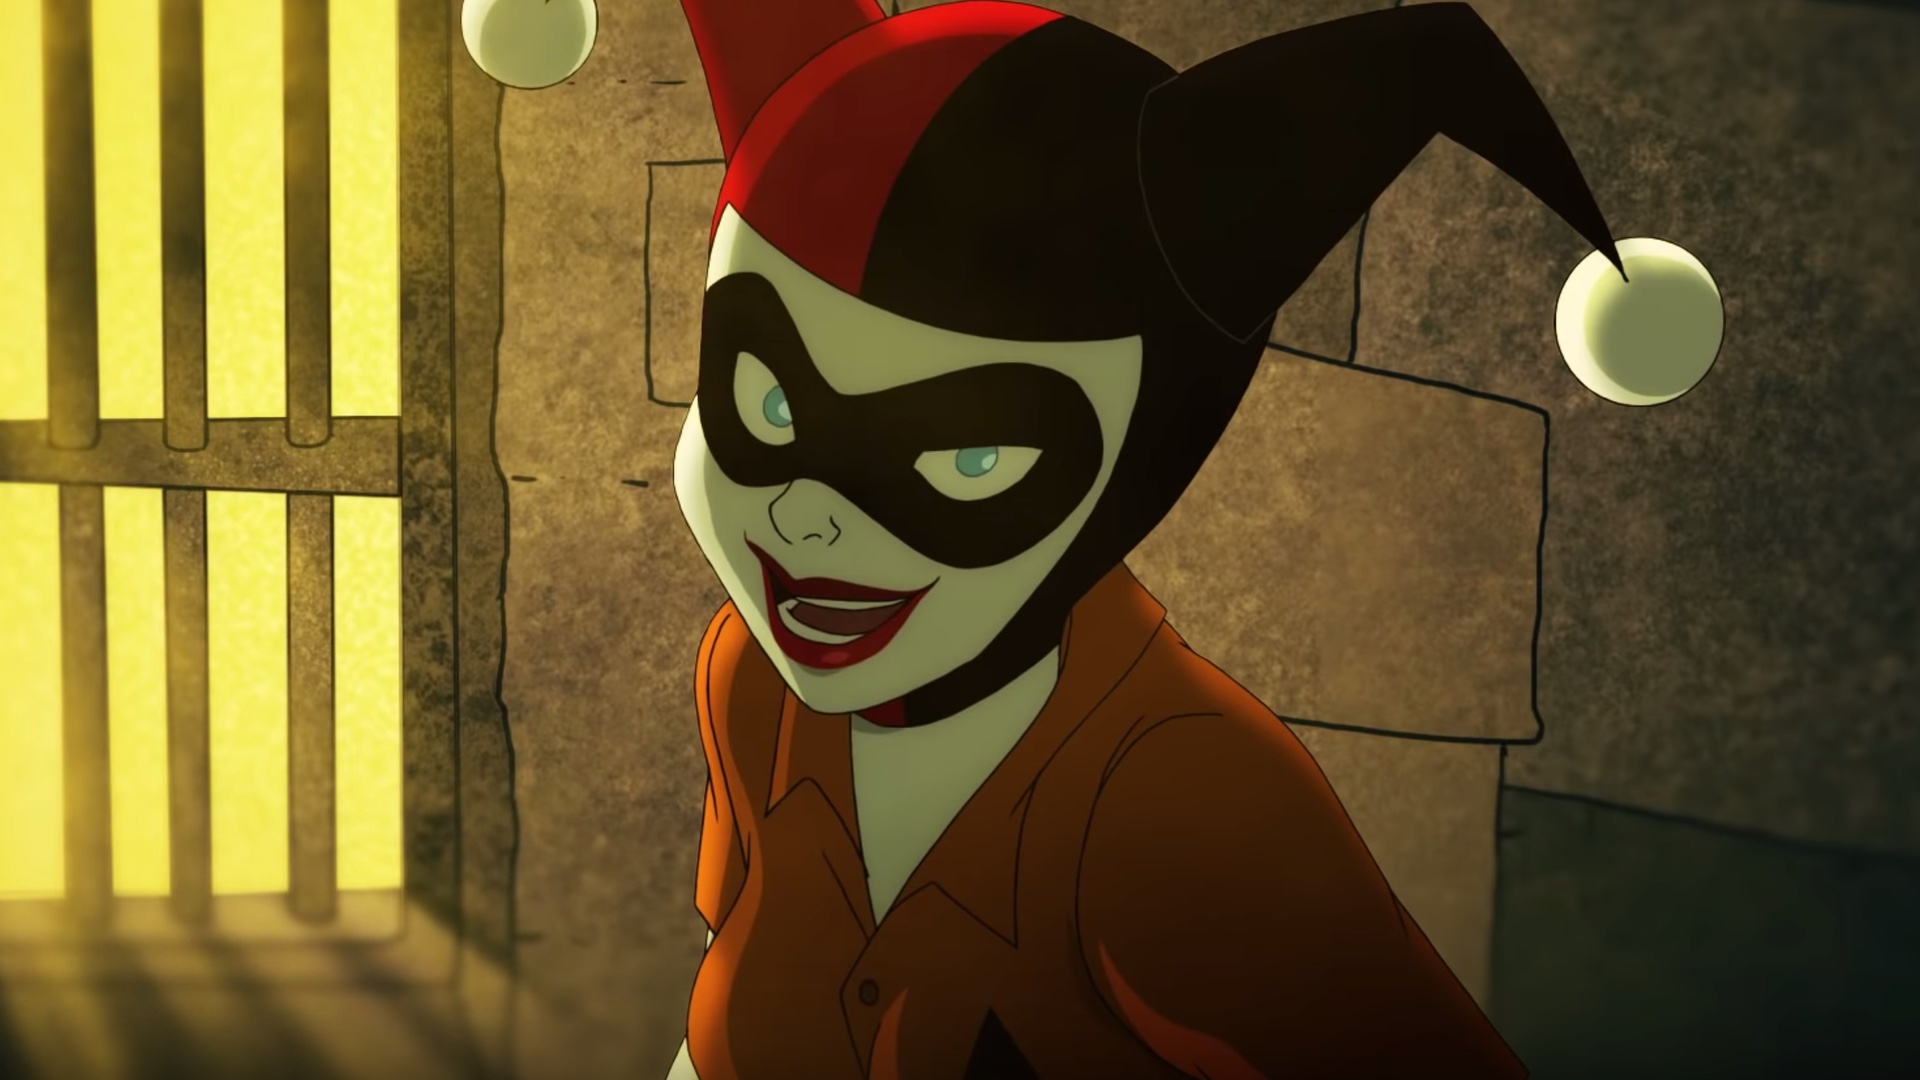 Catwoman To Be Voiced By Sanaa Lathan In DC Universe’s Harley Quinn